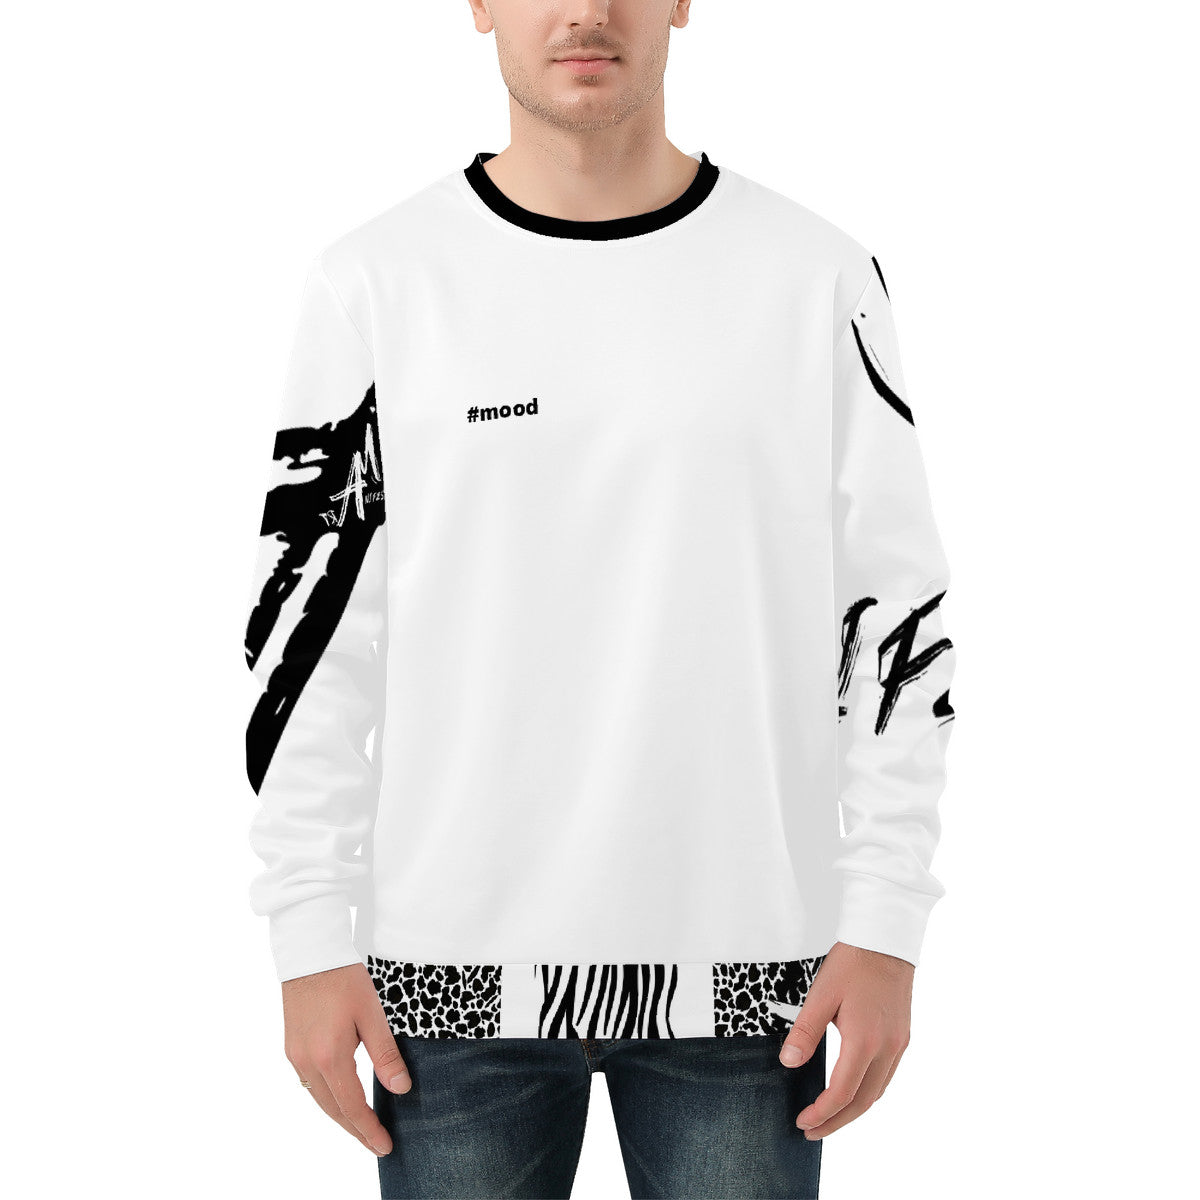 Mood Of Art Men's All Over Print Sweater by Art Manifested - ENE TRENDS -custom designed-personalized-near me-shirt-clothes-dress-amazon-top-luxury-fashion-men-women-kids-streetwear-IG